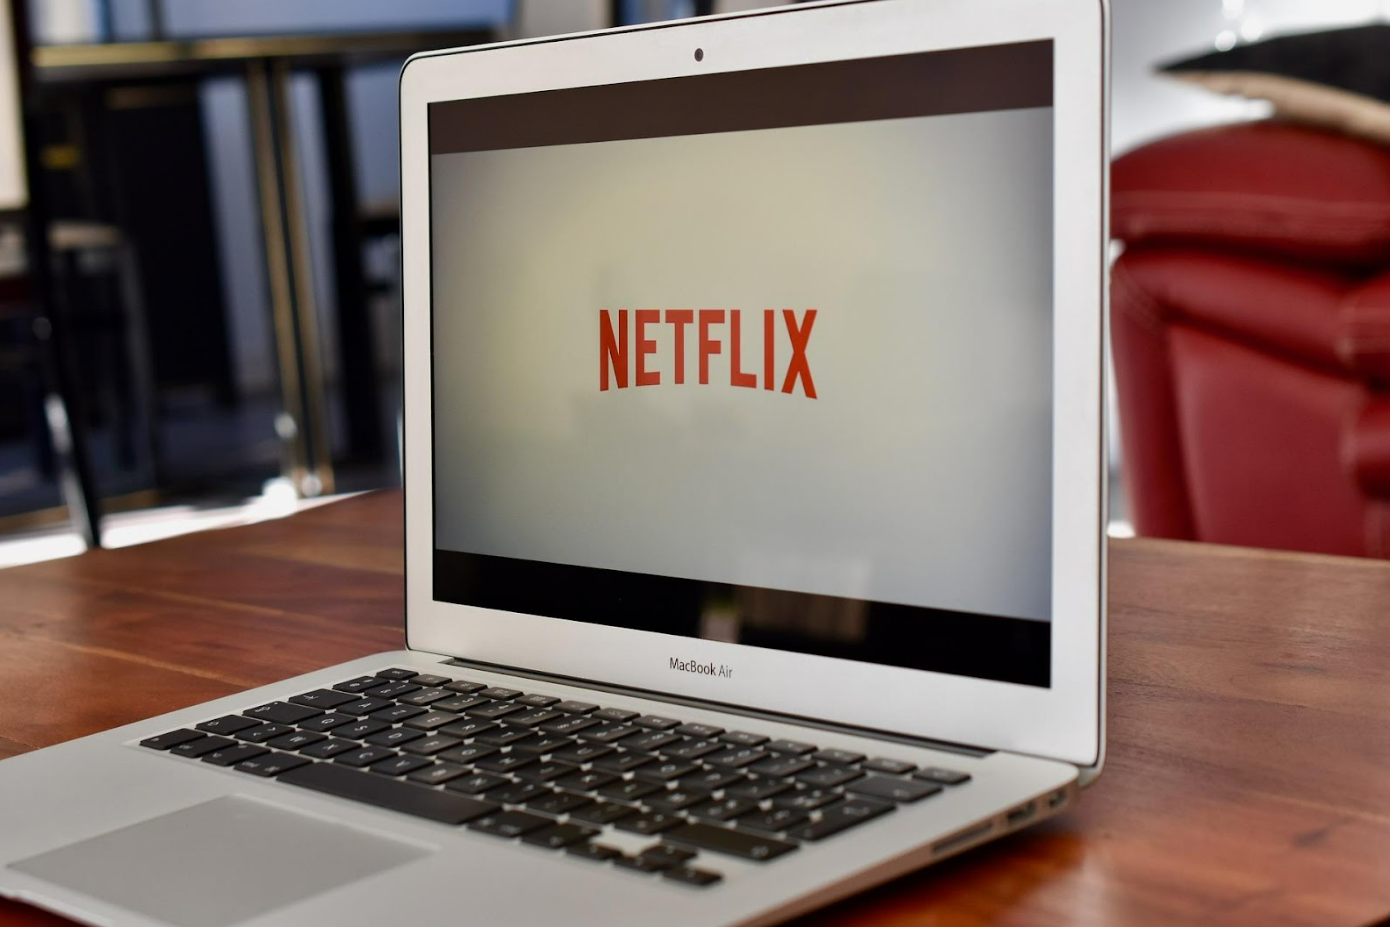 Microsoft-Netflix's Ad Partnership: New Opportunity For Marketers?